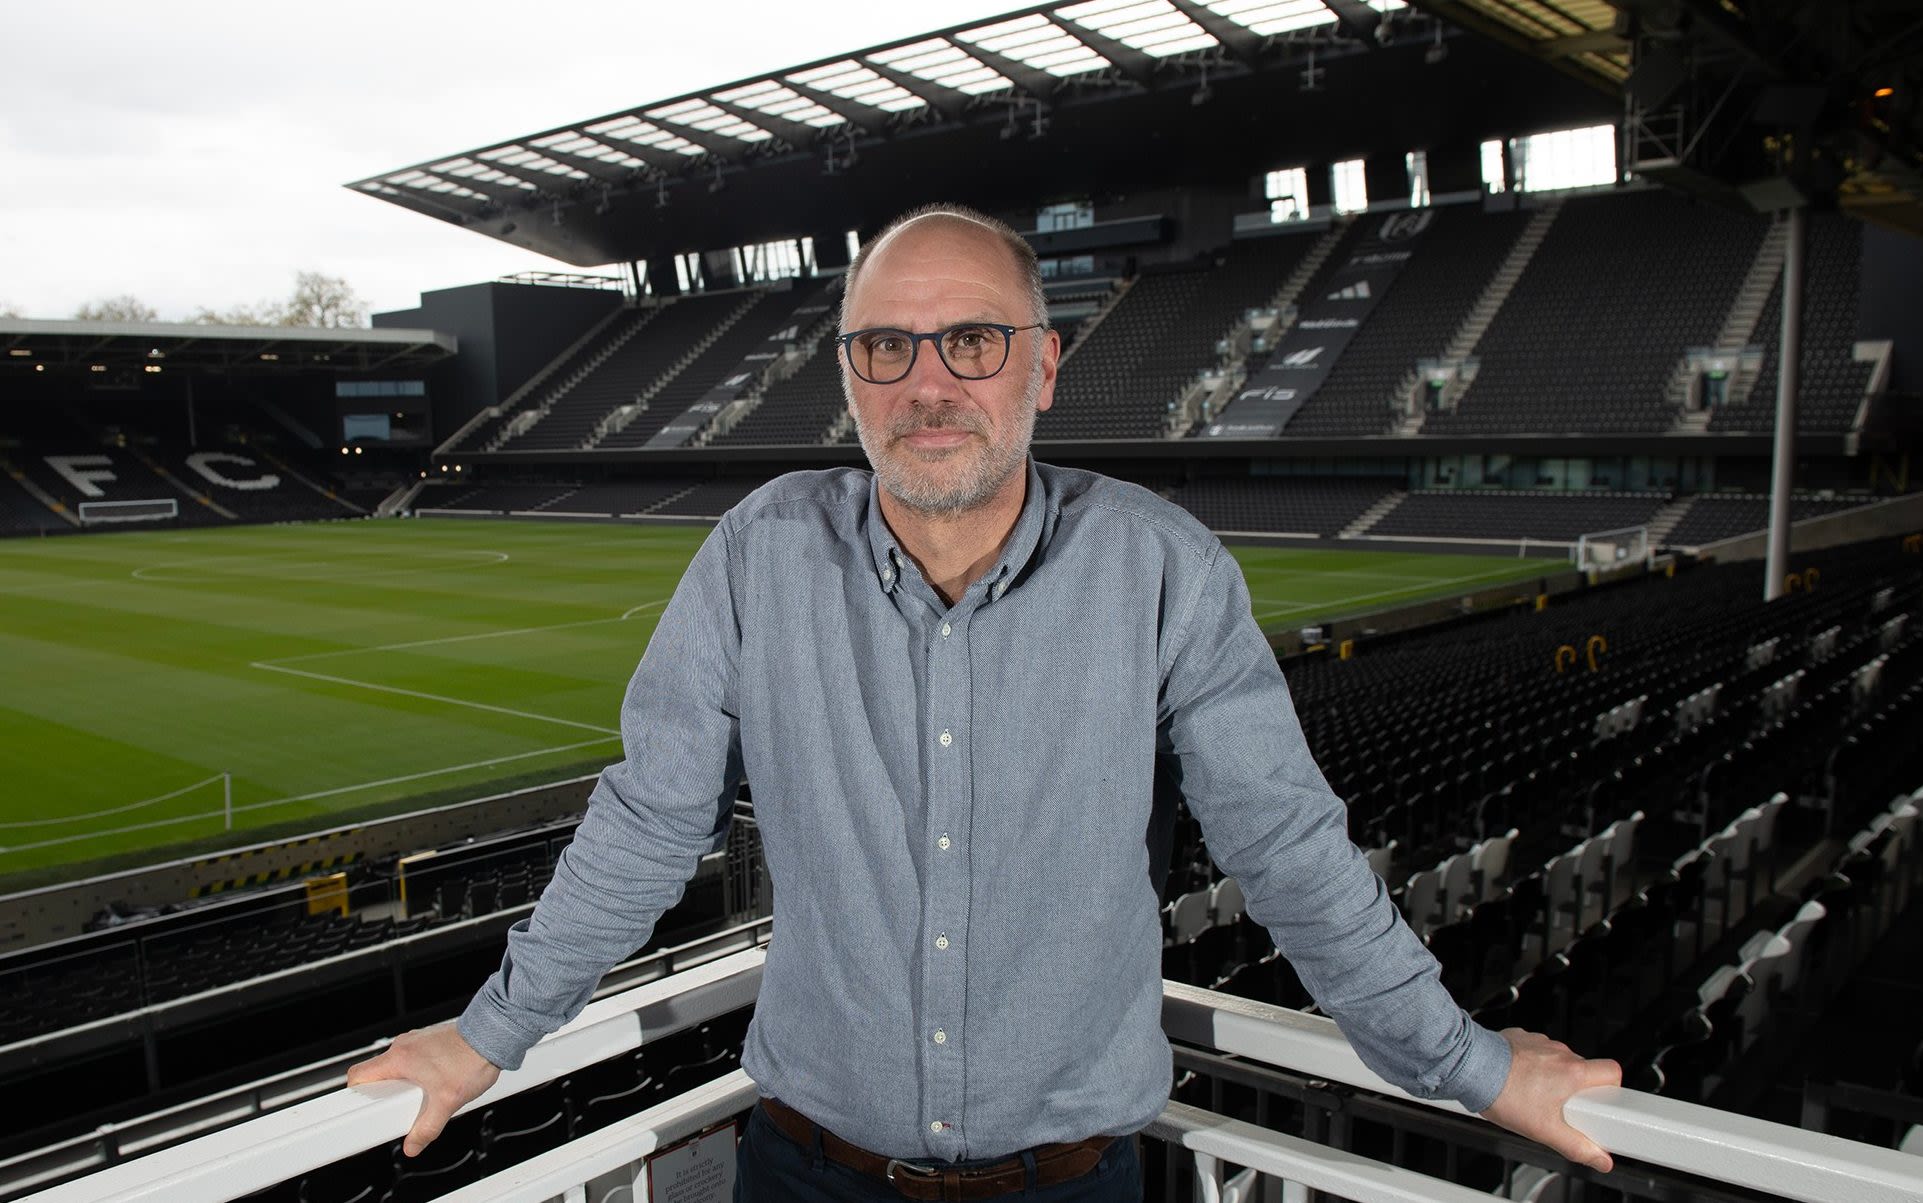 Succession writer Jesse Armstrong: Fulham’s Kenny Tete intimidates me more than Hollywood stars